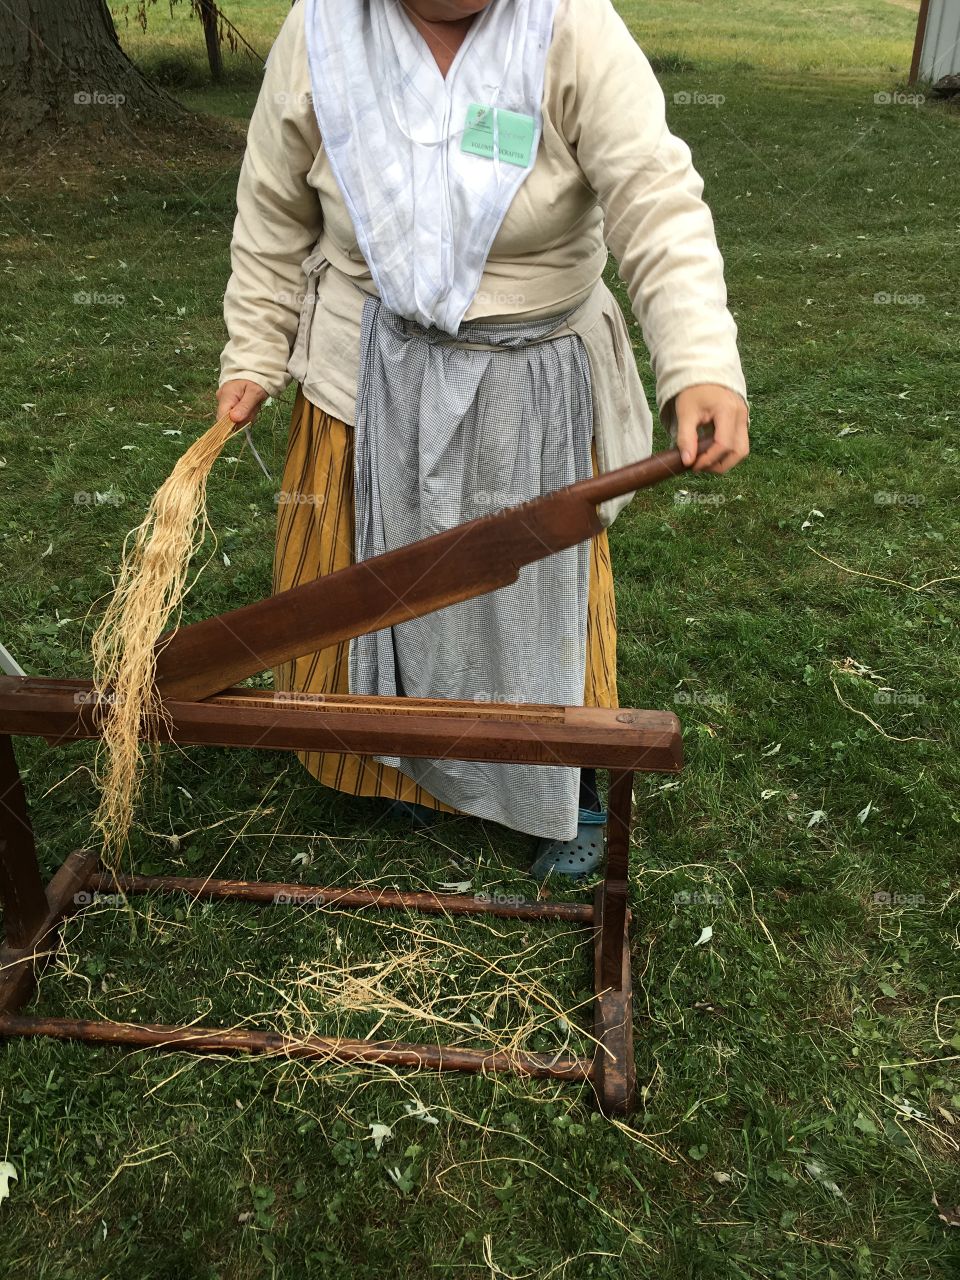 A volunteer, demonstrating the process of flax twine, sisal rope, and slave clothing during colonial times. 